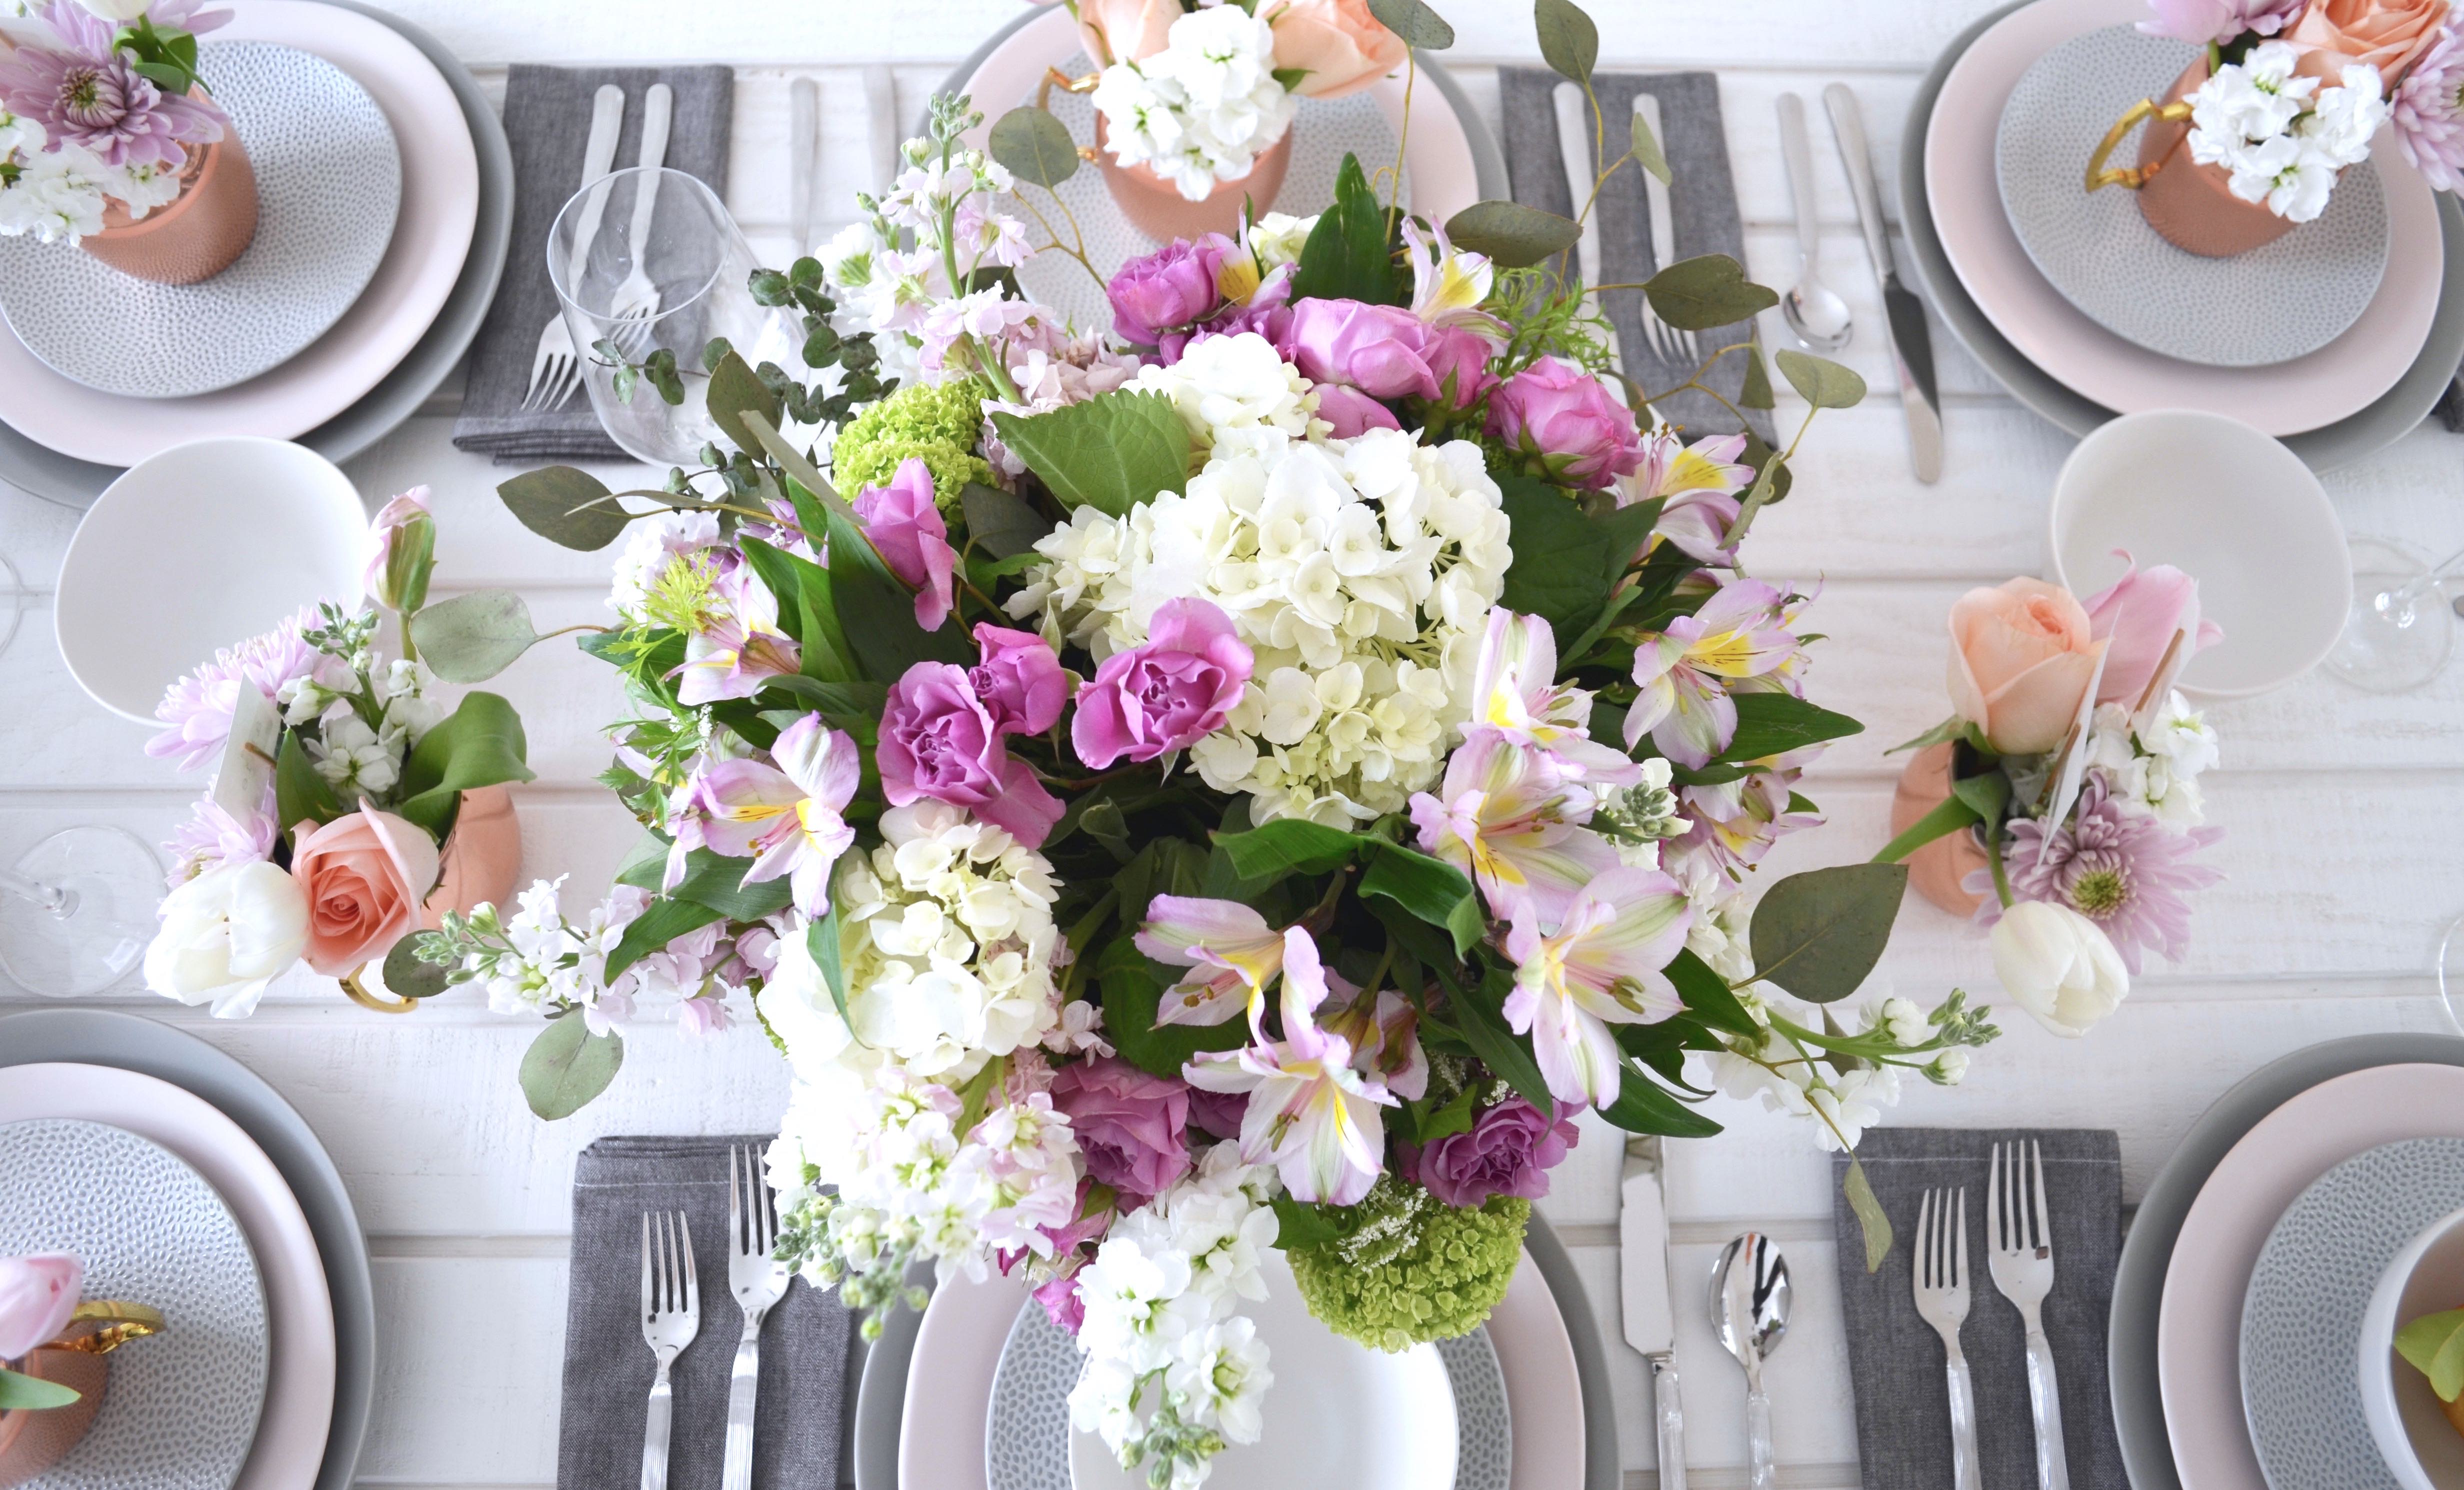 A Pretty in Pastel Mother’s Day Table